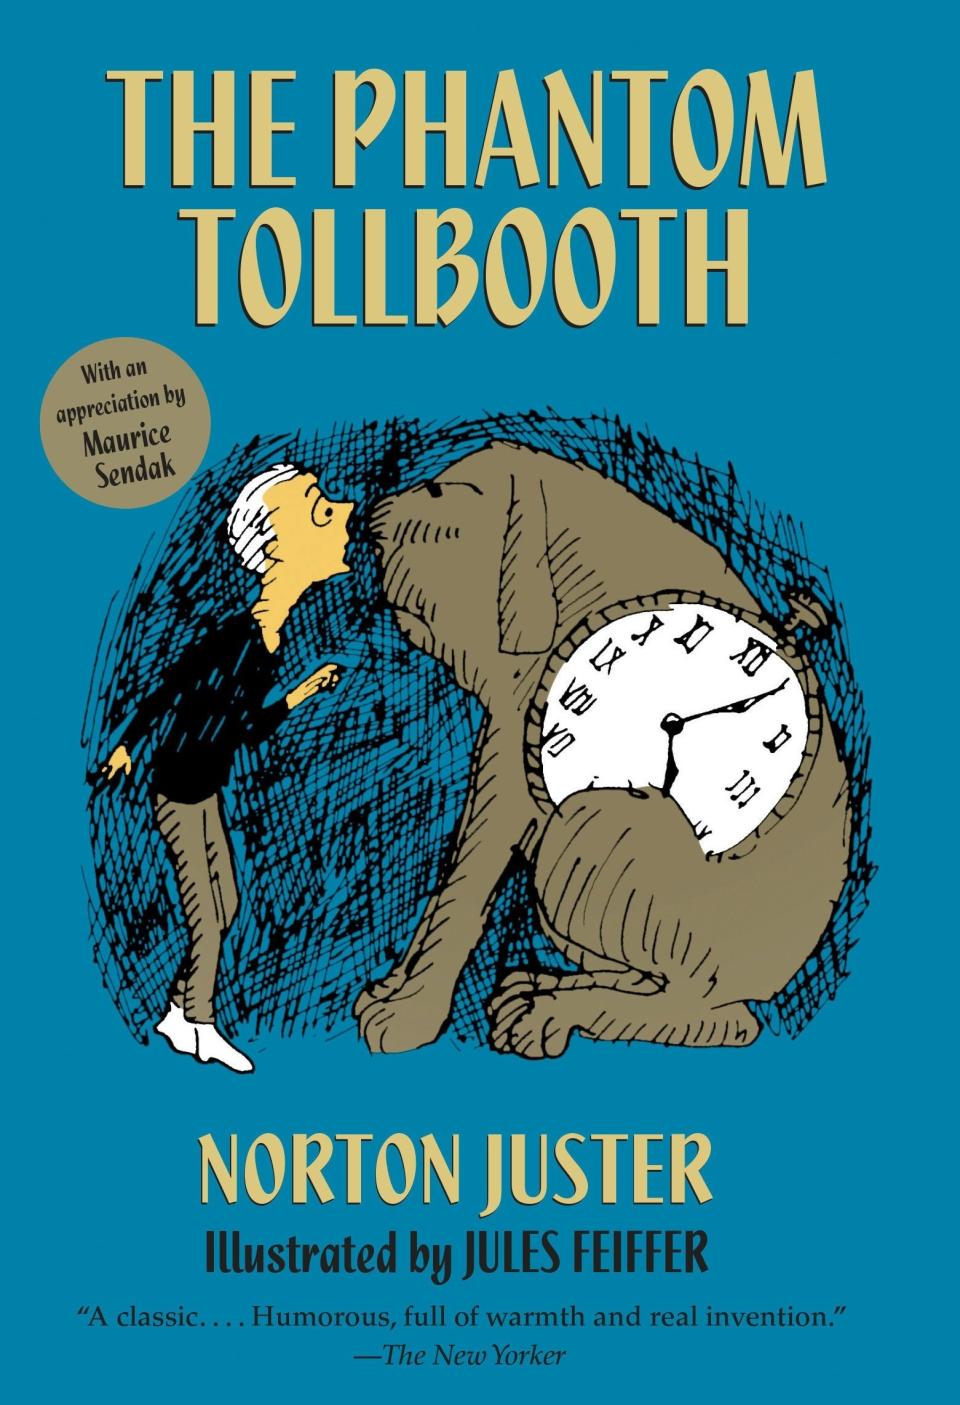 The cover of "The Phantom Tollbooth" by Norton Juster.